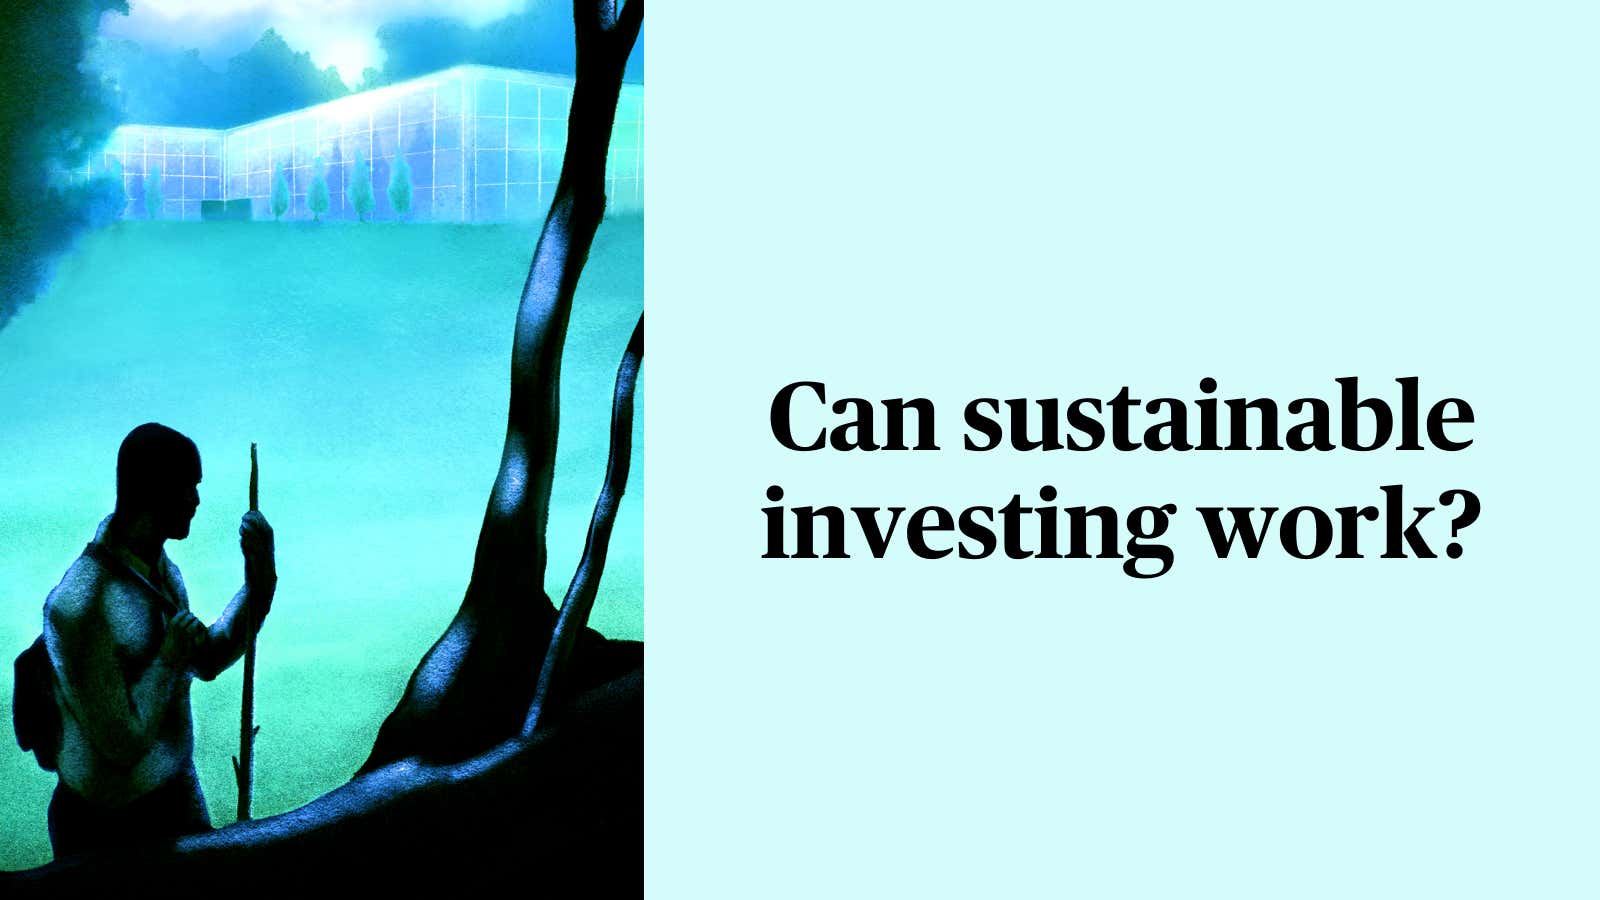 For members—Can sustainable investing work?